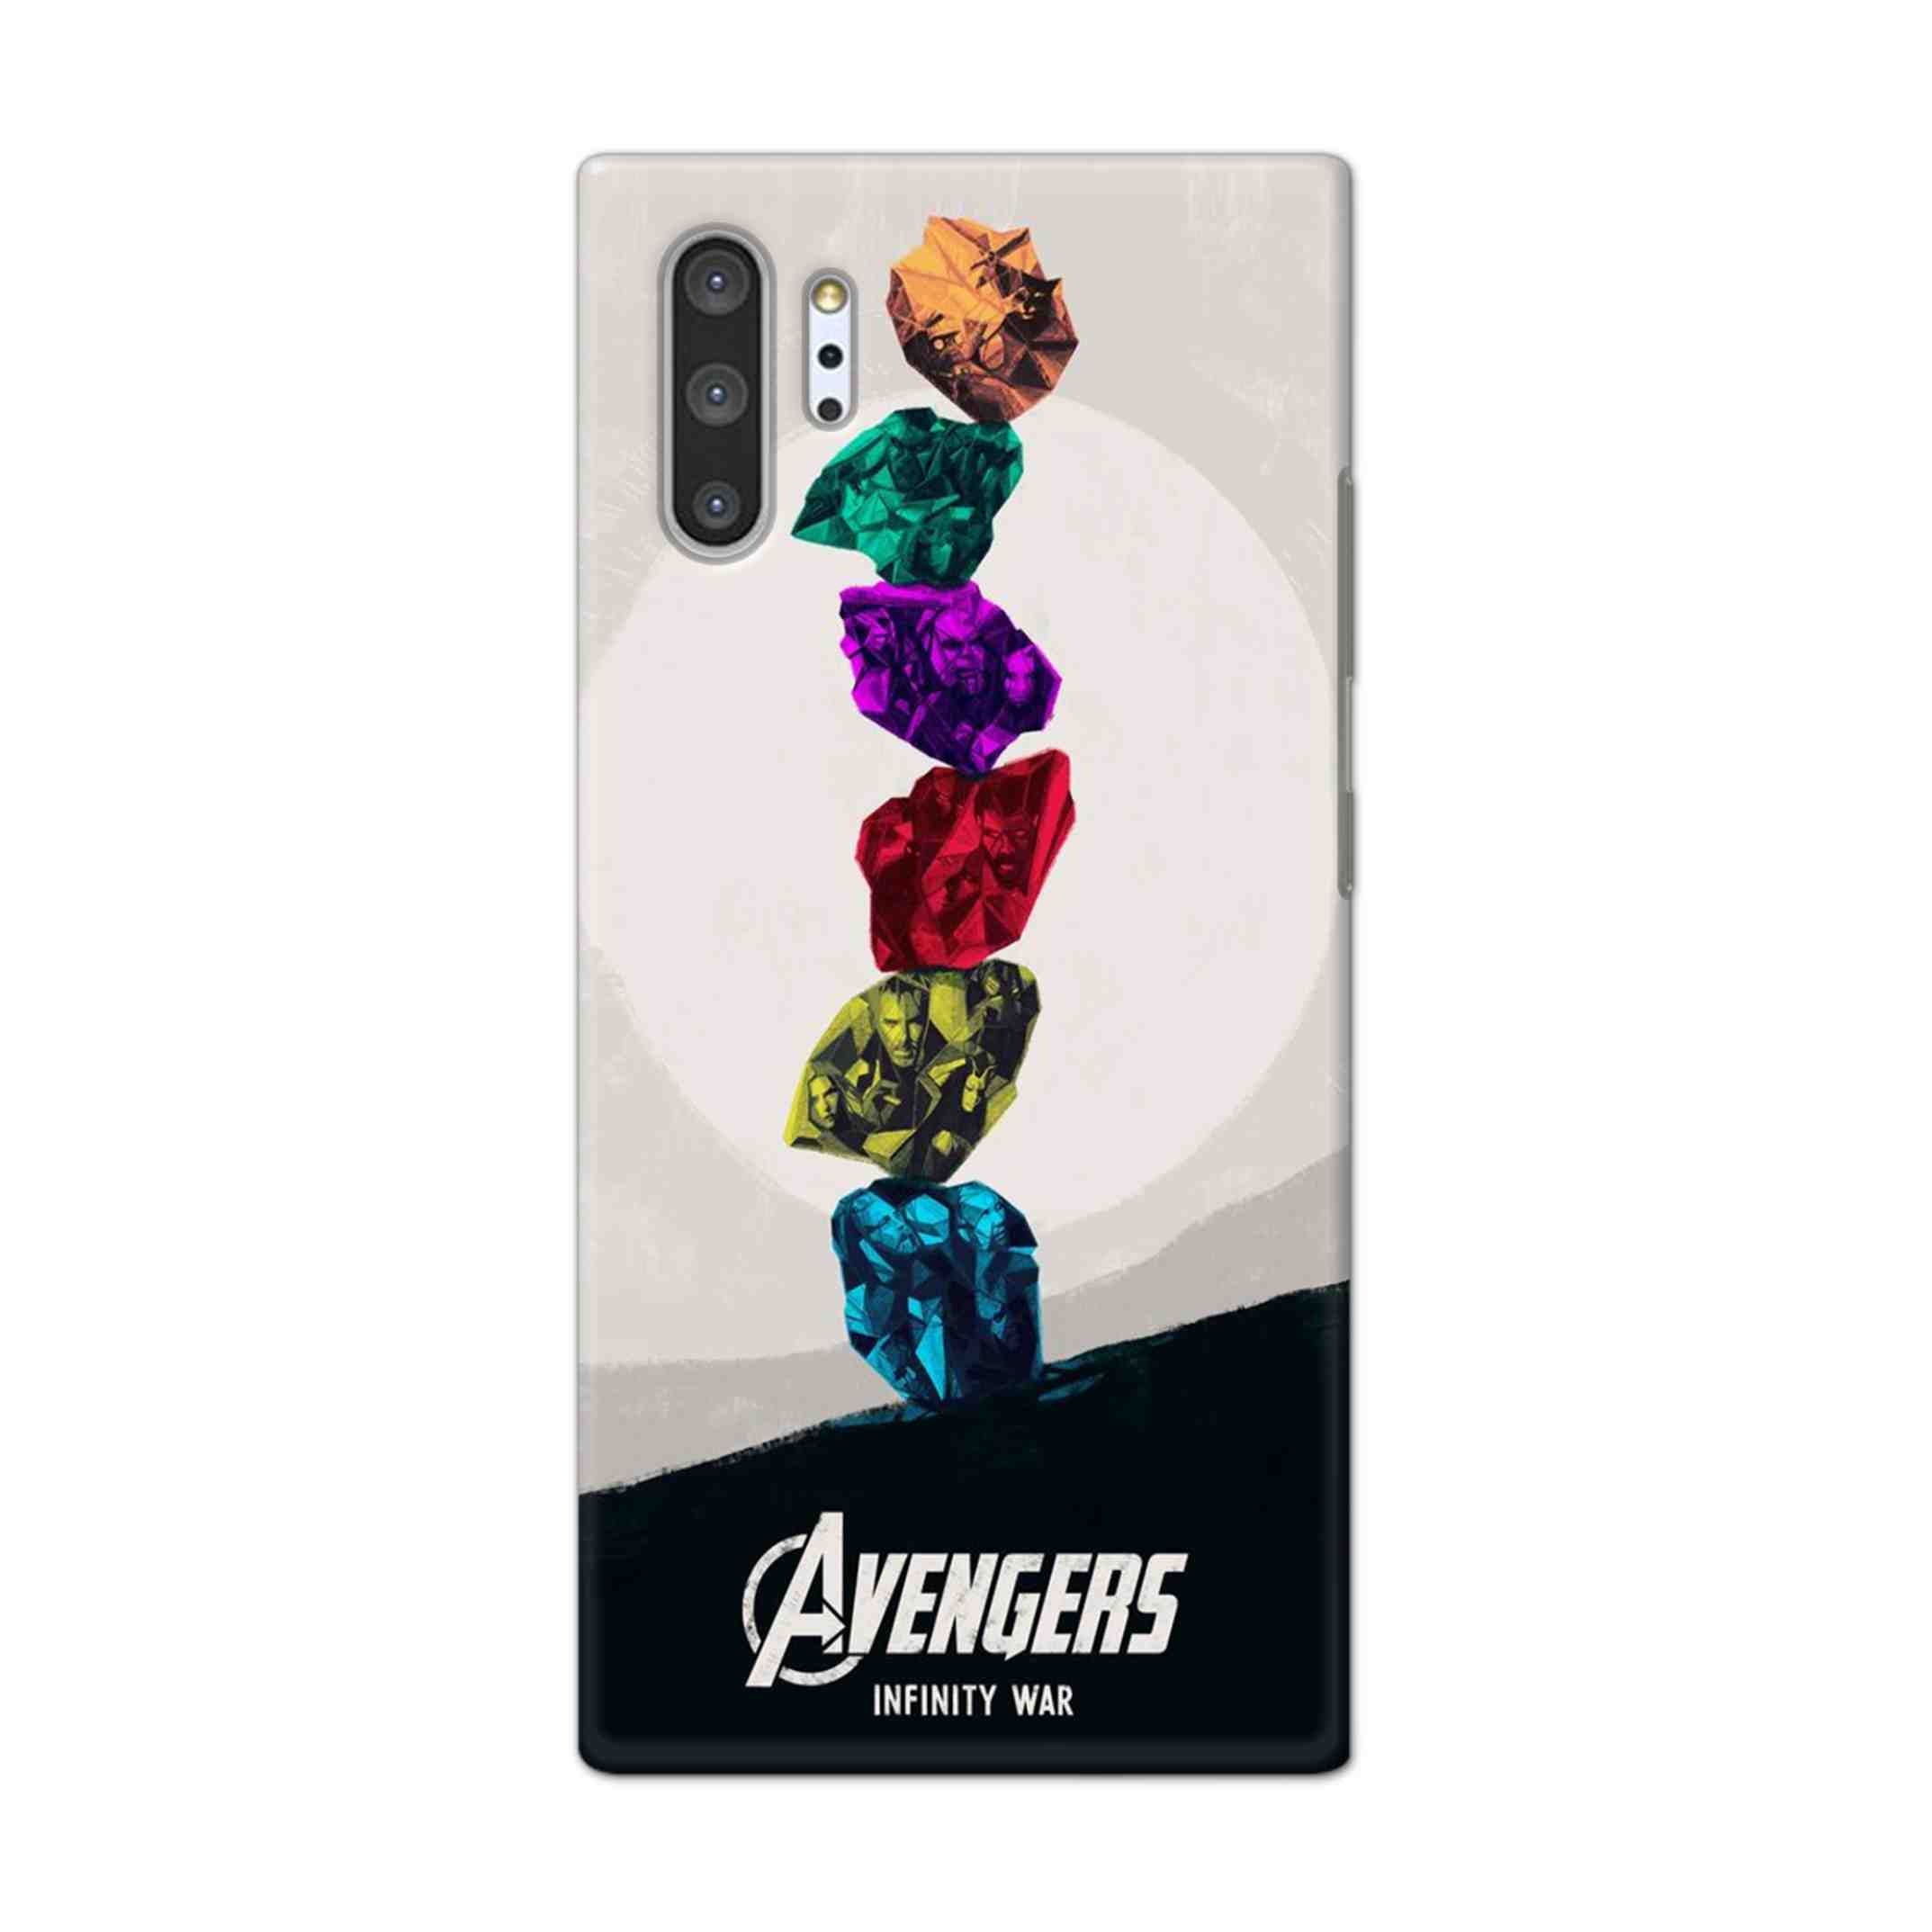 Buy Avengers Stone Hard Back Mobile Phone Case Cover For Samsung Galaxy Note 10 Pro Online